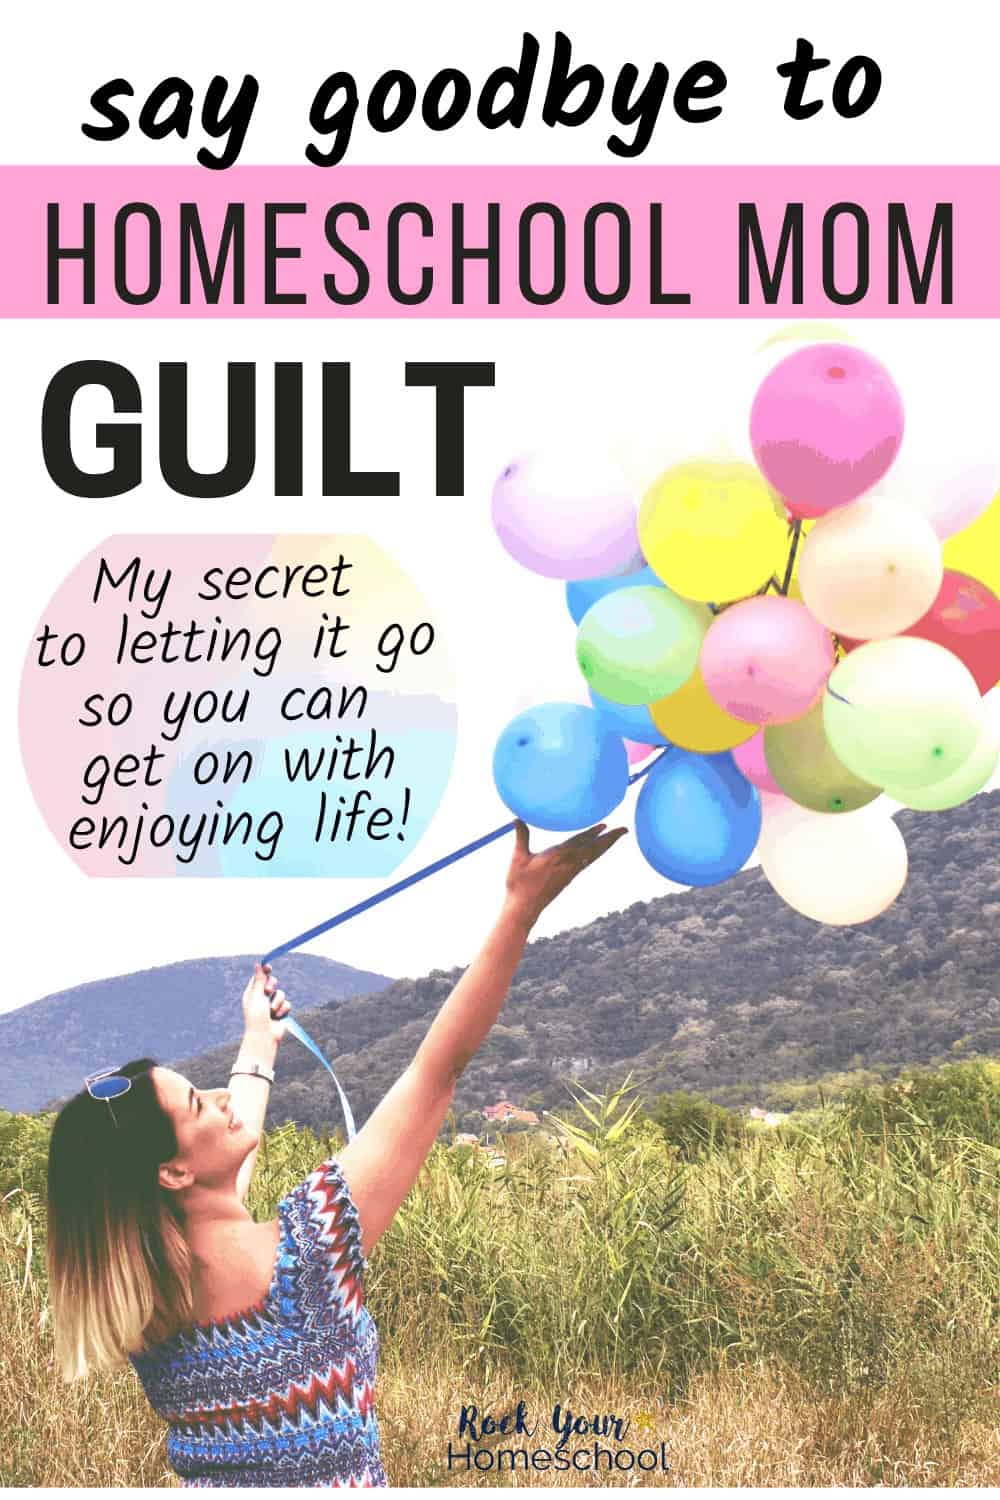 A Powerful Way to Stop the Homeschool Mom Guilt